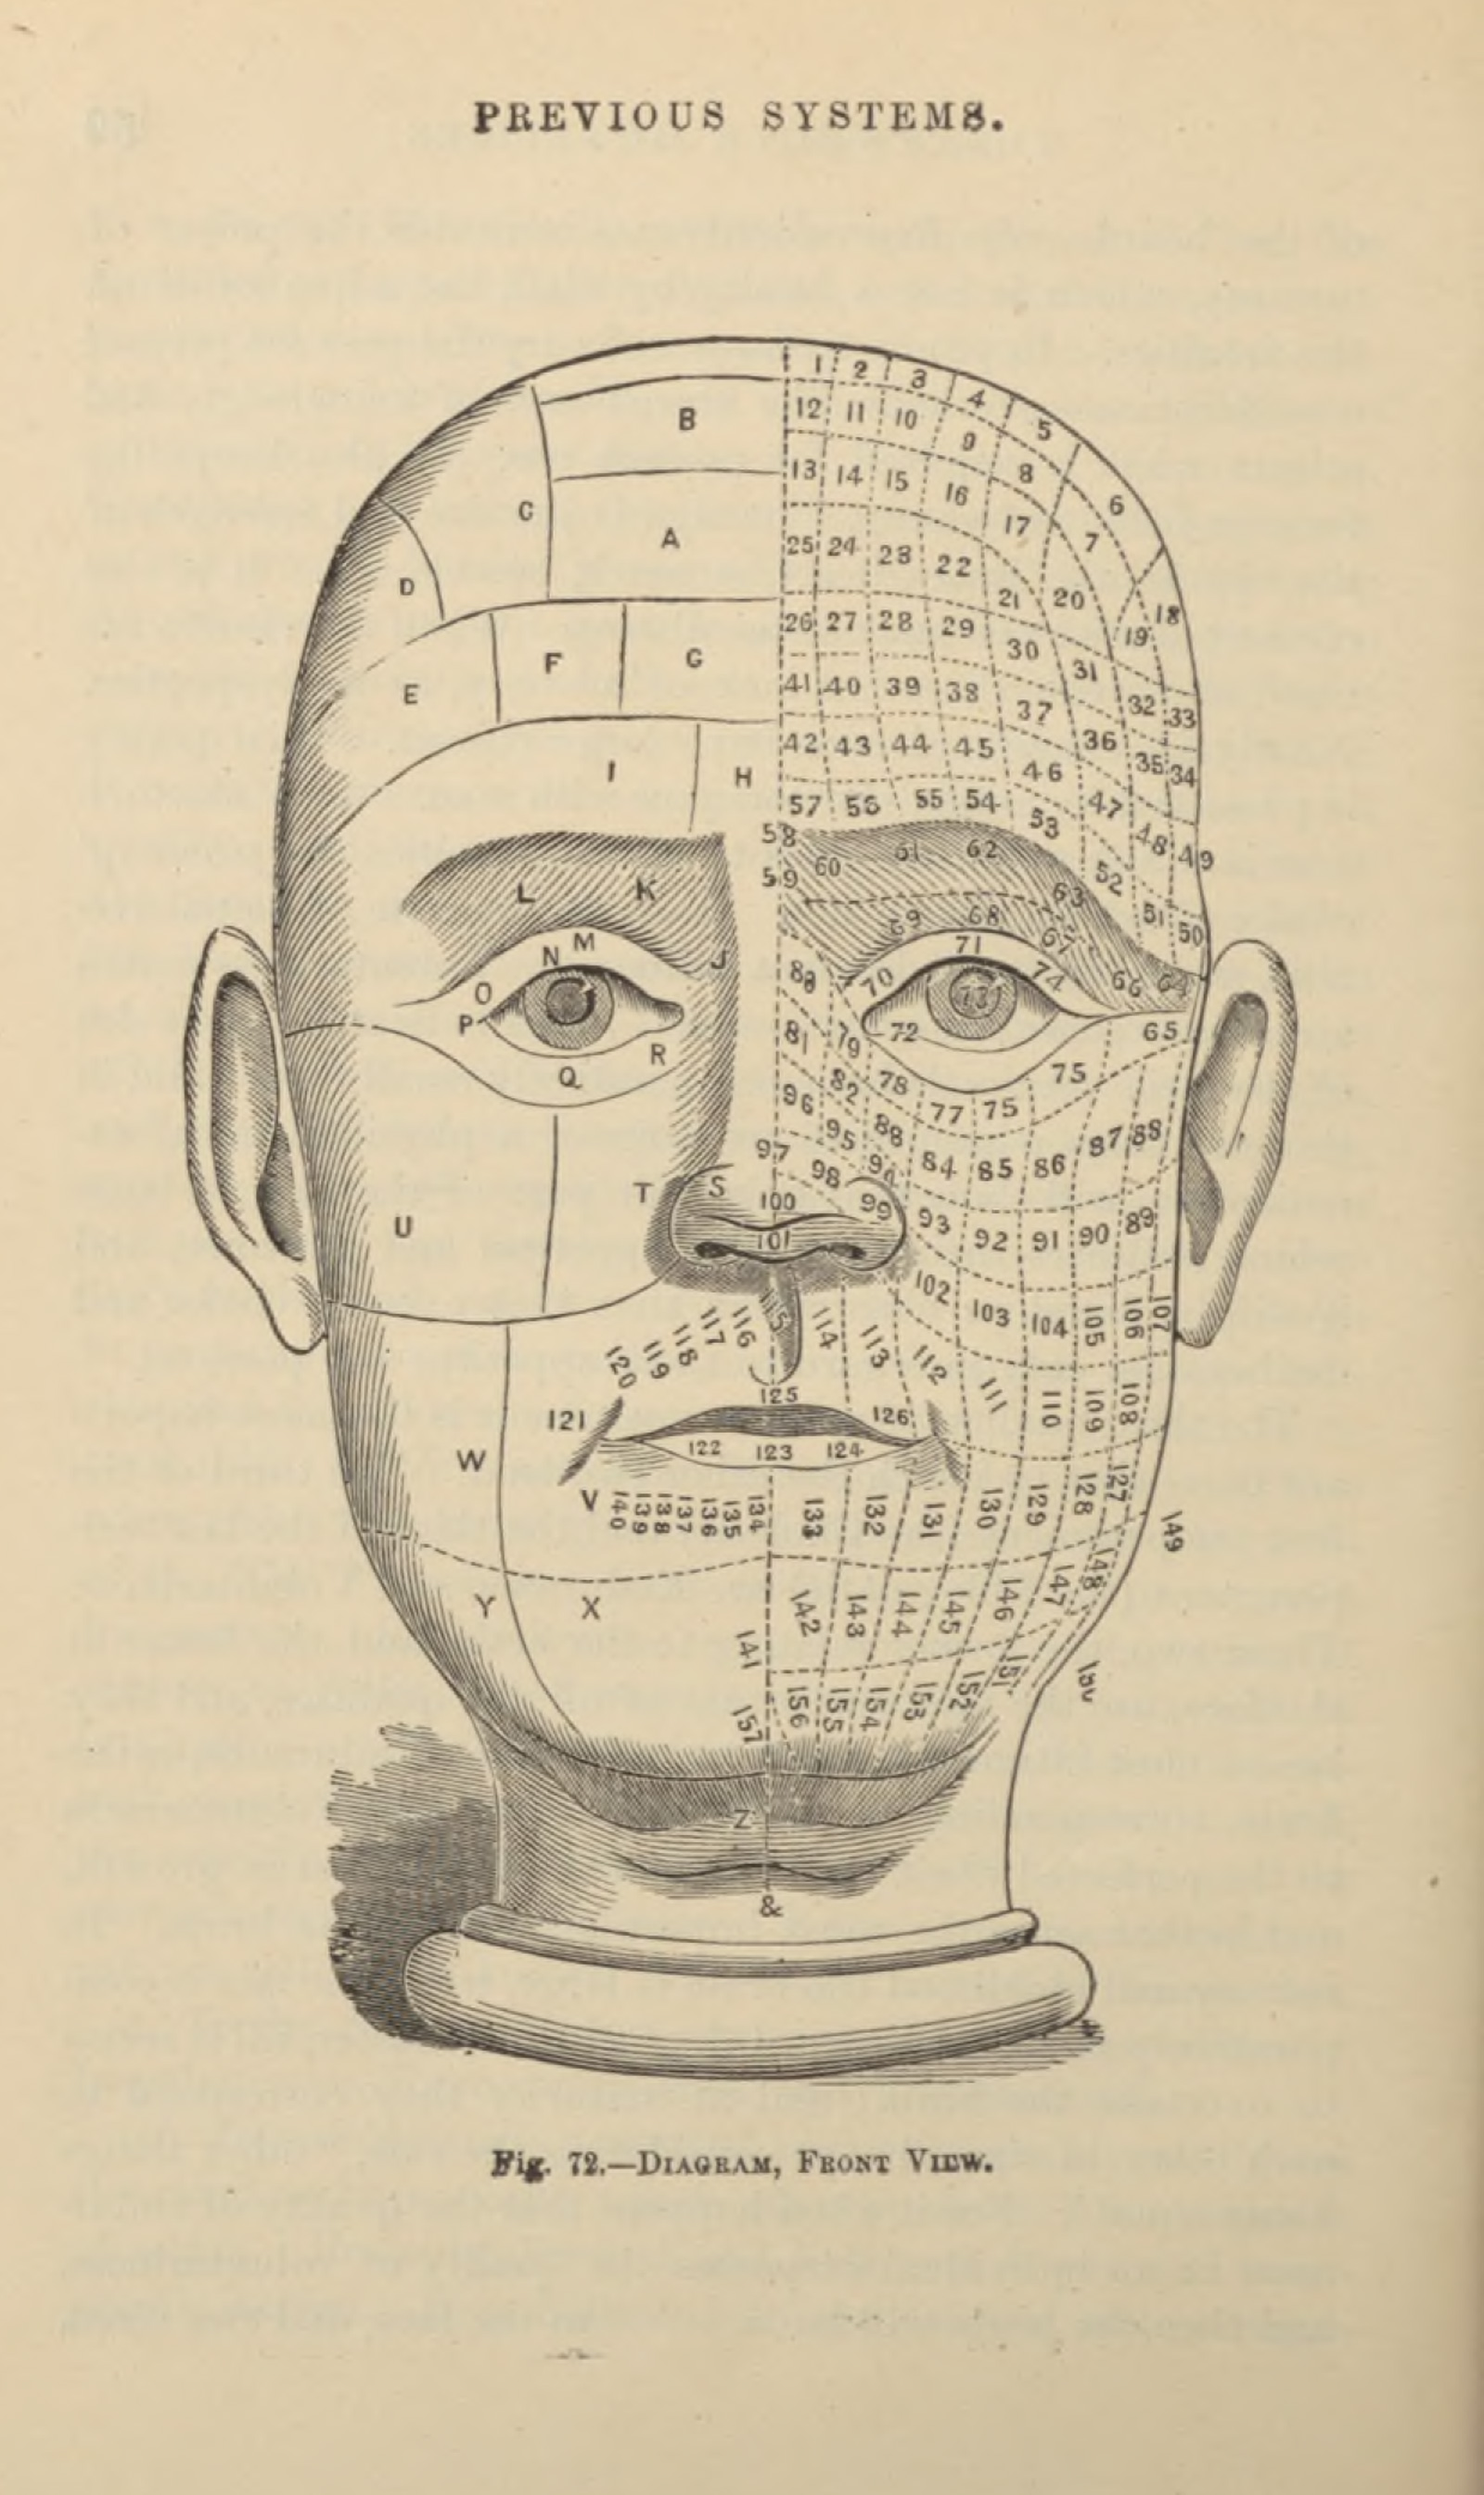 Illustration of a head with marking splitting it into sections